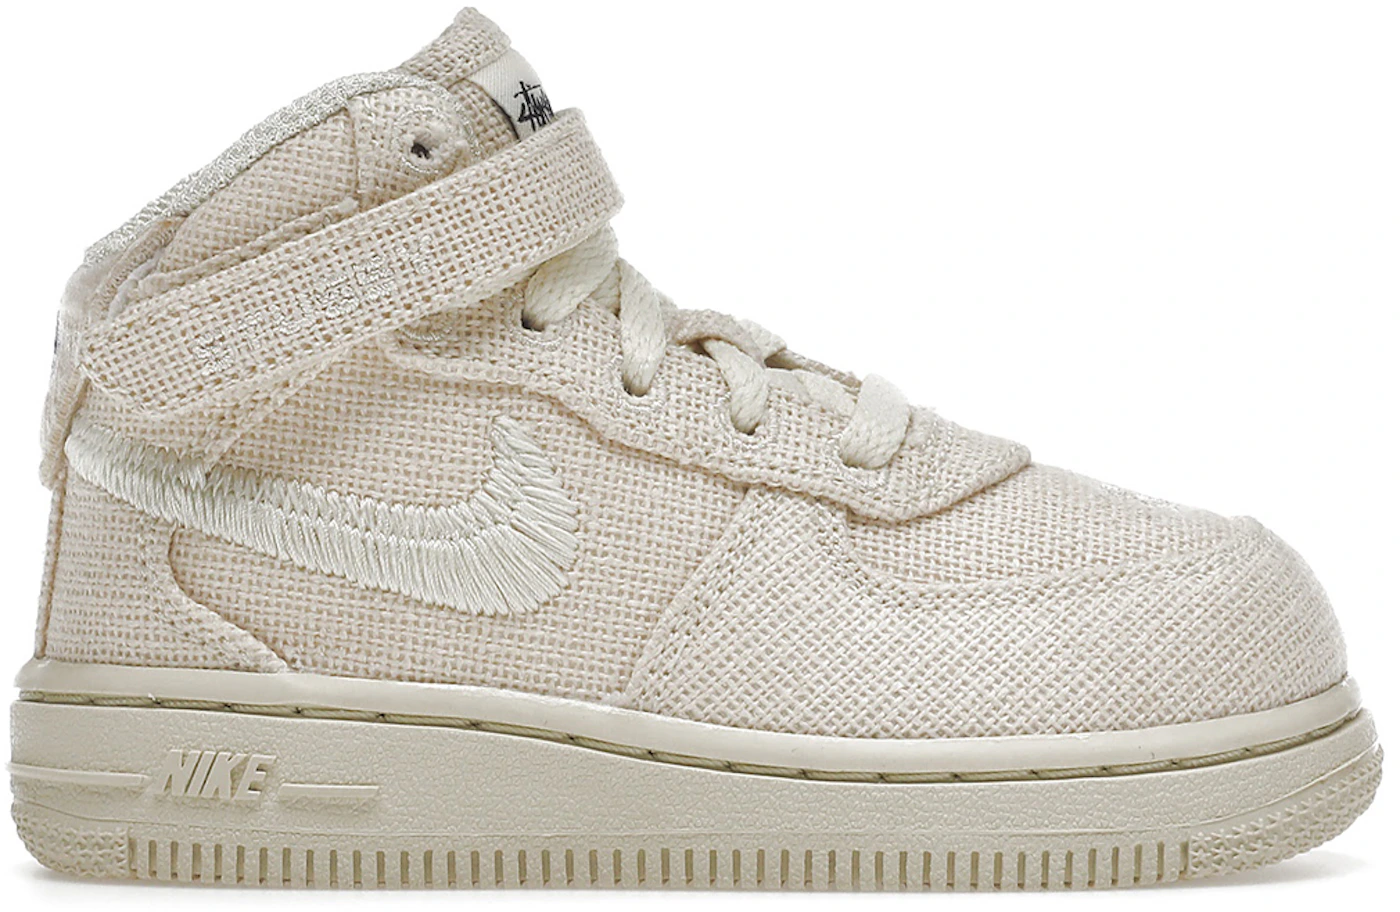 Nike Air Force 1 Mid Stussy Fossil (TD) Toddler - DN4159-200 - US